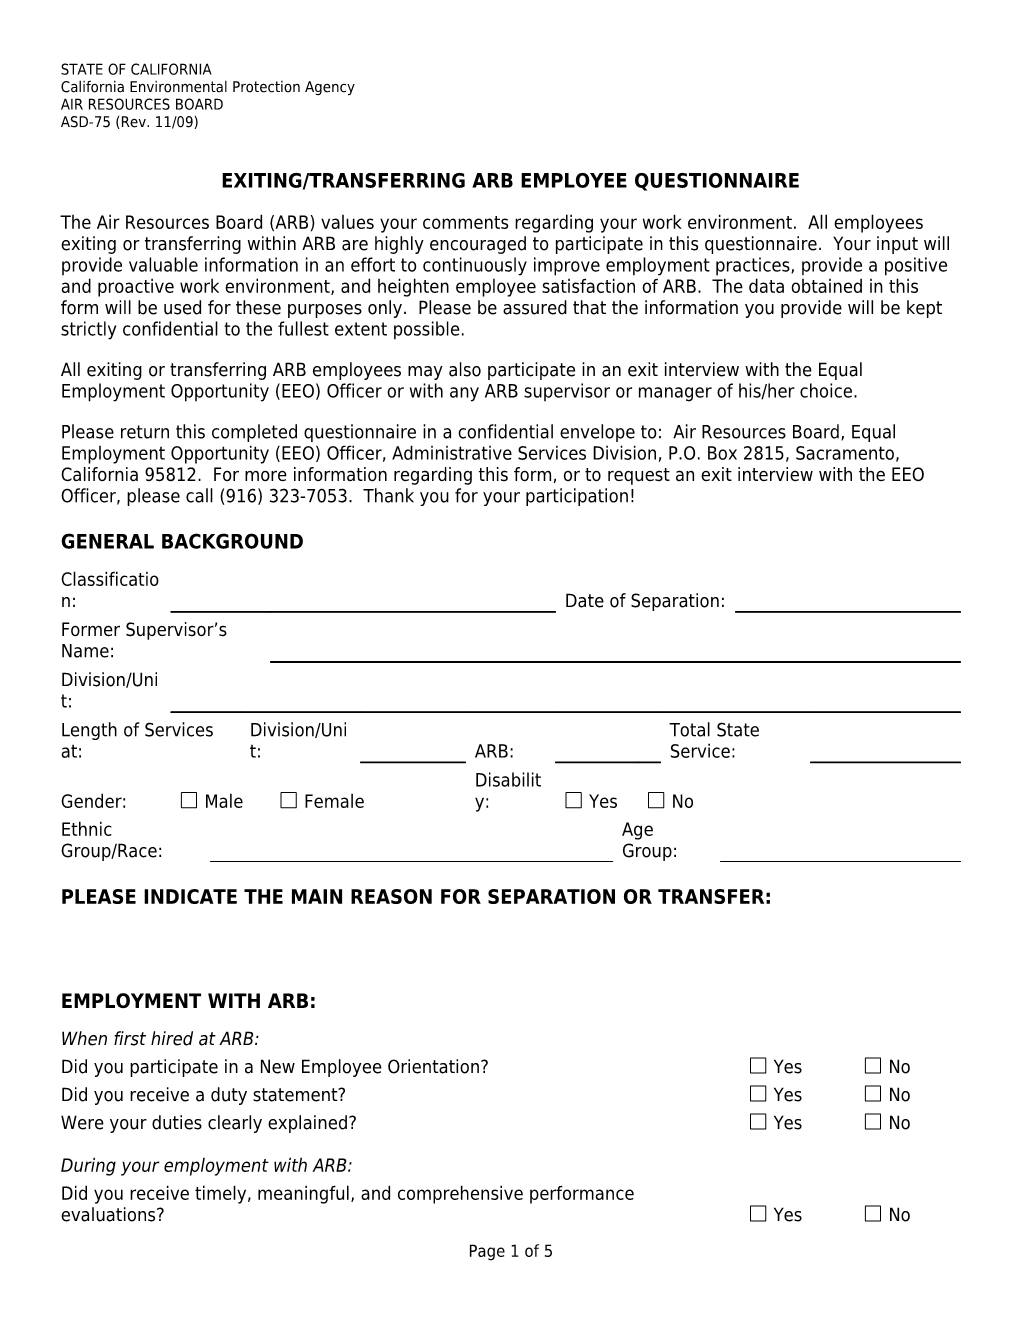 Forms: Exiting/Transferring ARB Employee Questionnaire (ASD 75)